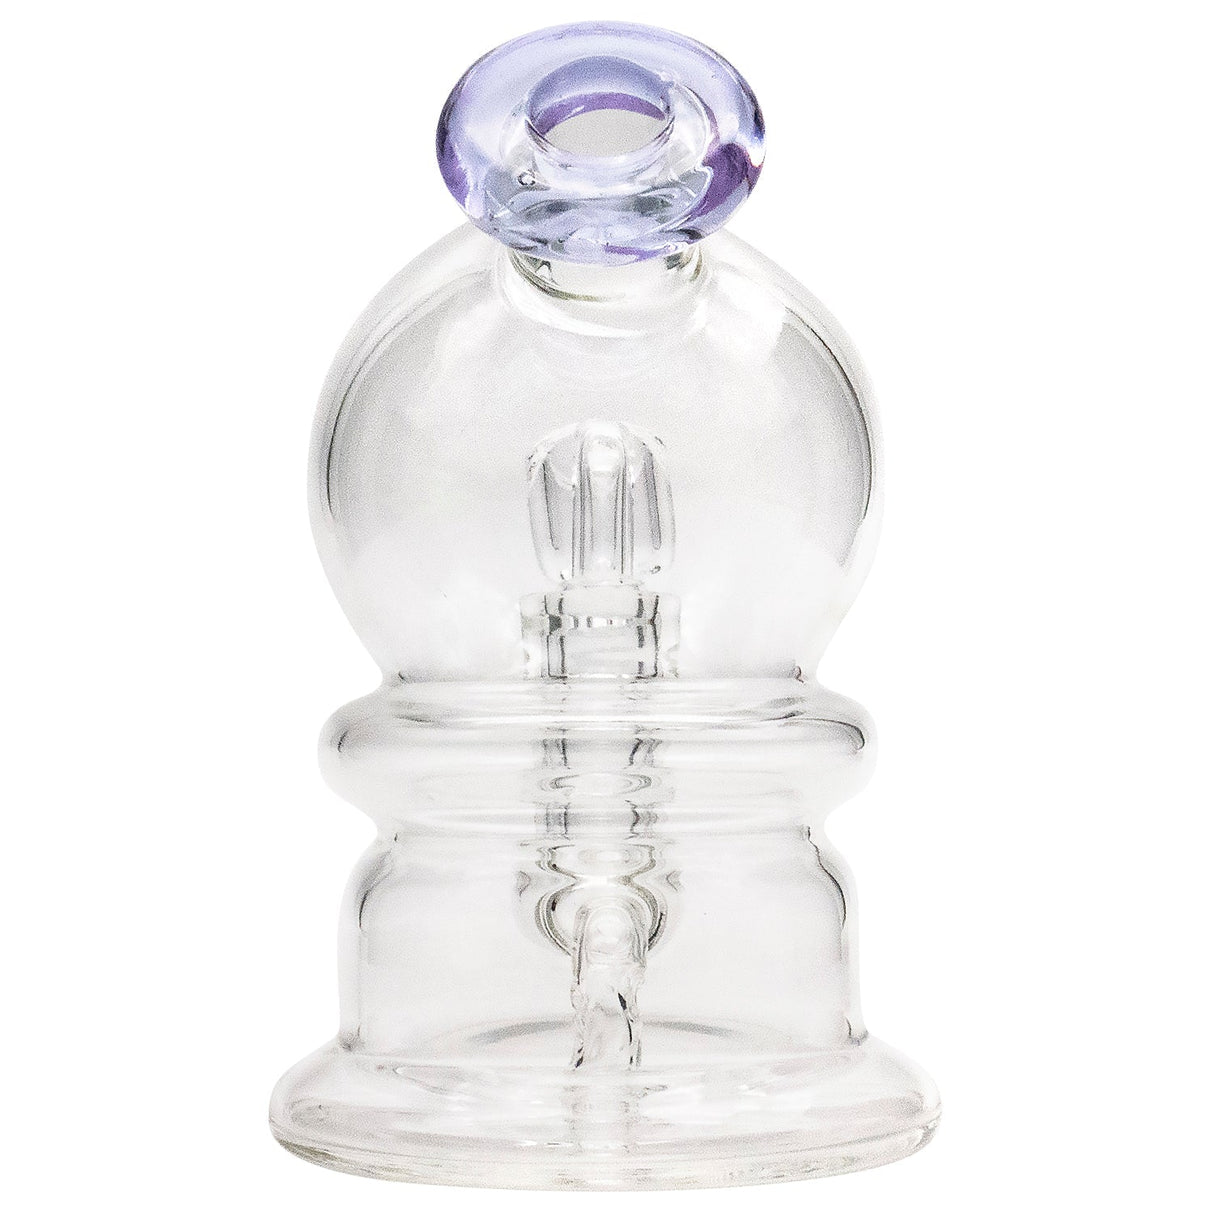 Glassic Compact Globe Banger Hanger Dab Rig Front View with Purple Accent